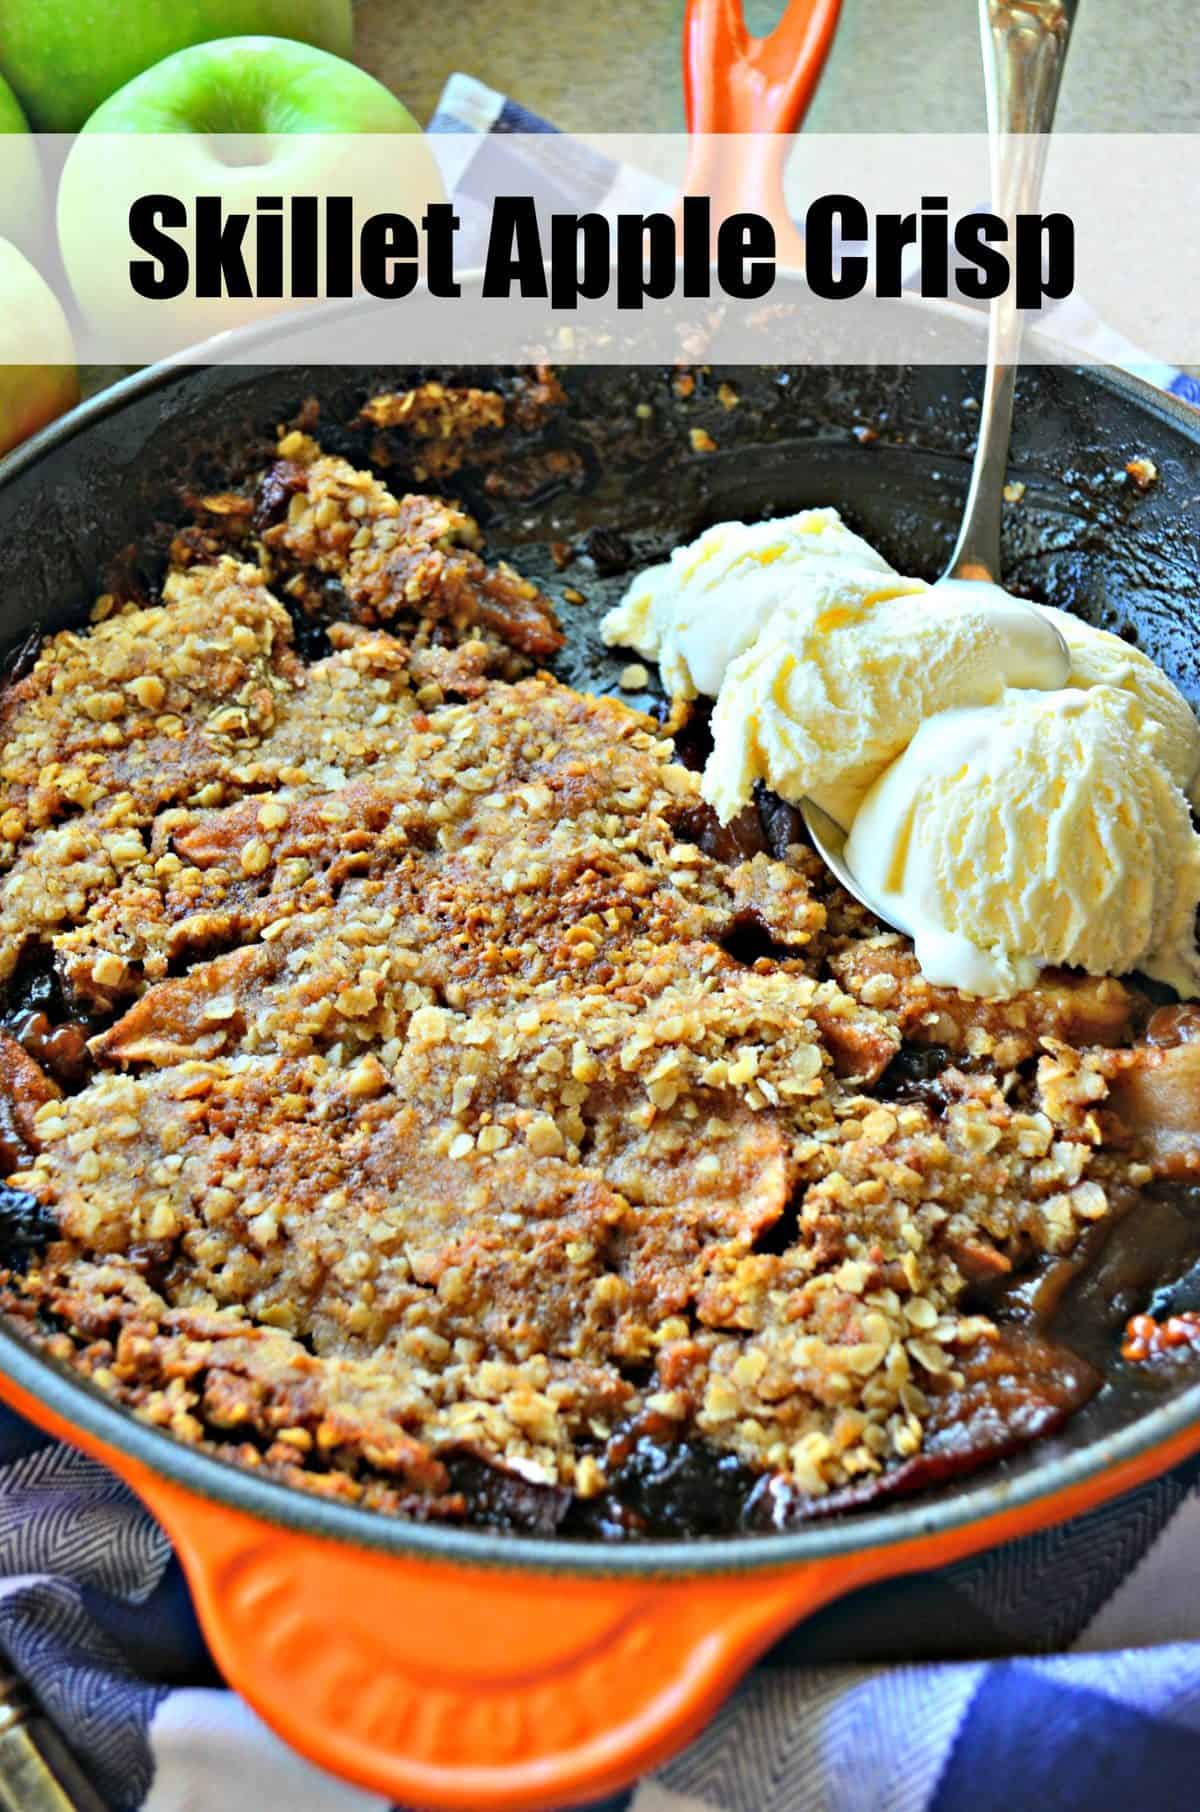 Top view of Skillet Apple Crisp in skillet with spoonful of vanilla ice cream and title text.